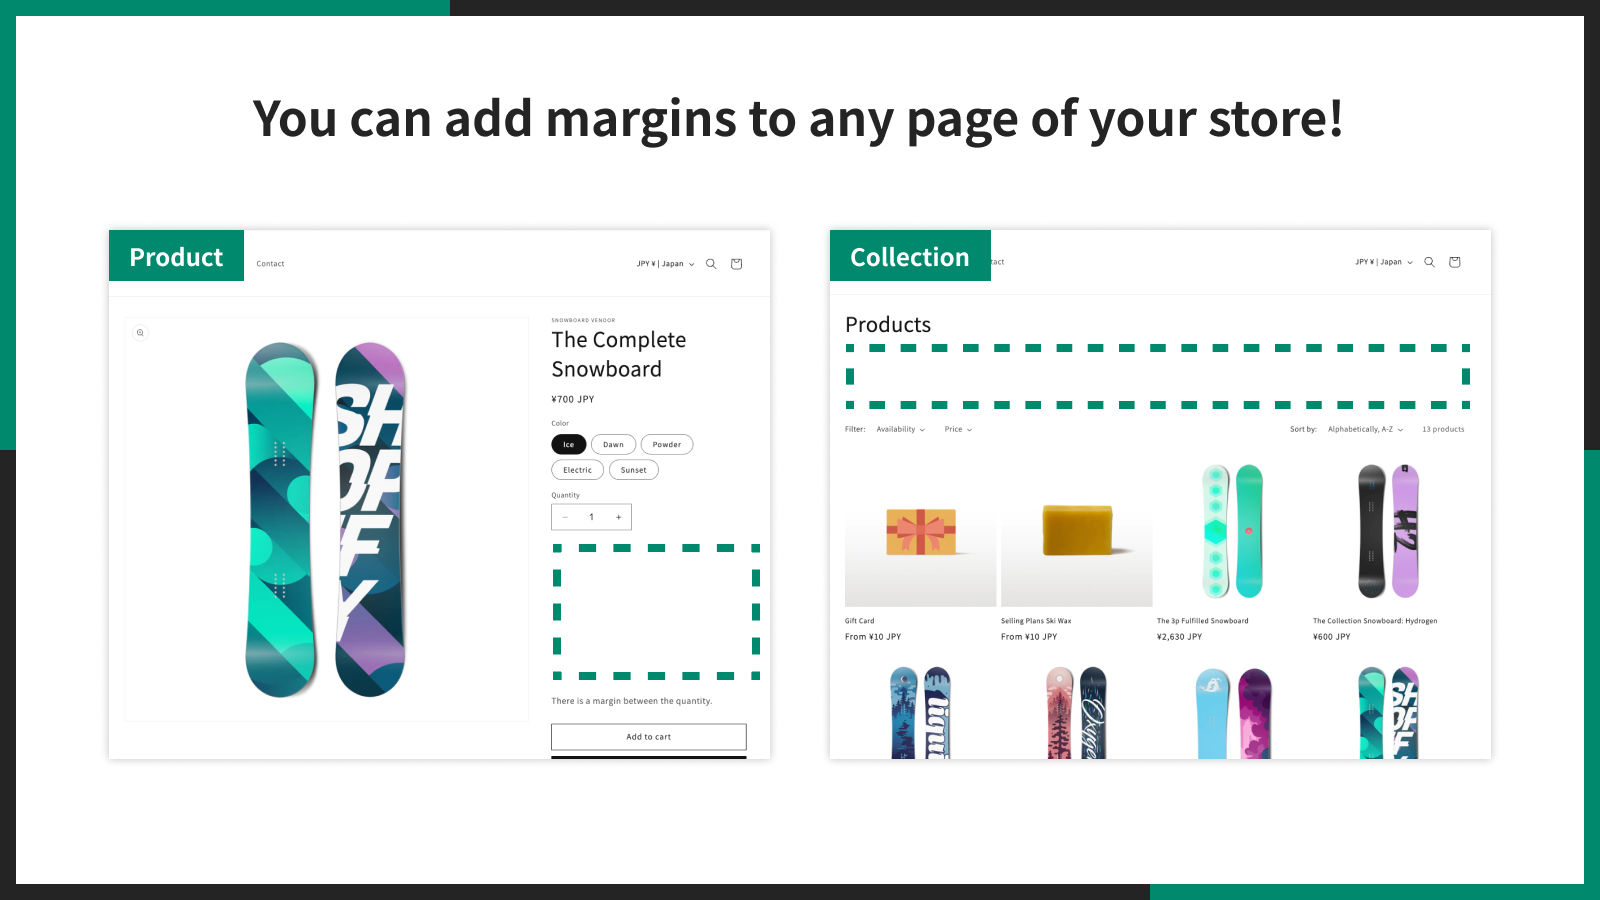 You can add margins to any page of your store!